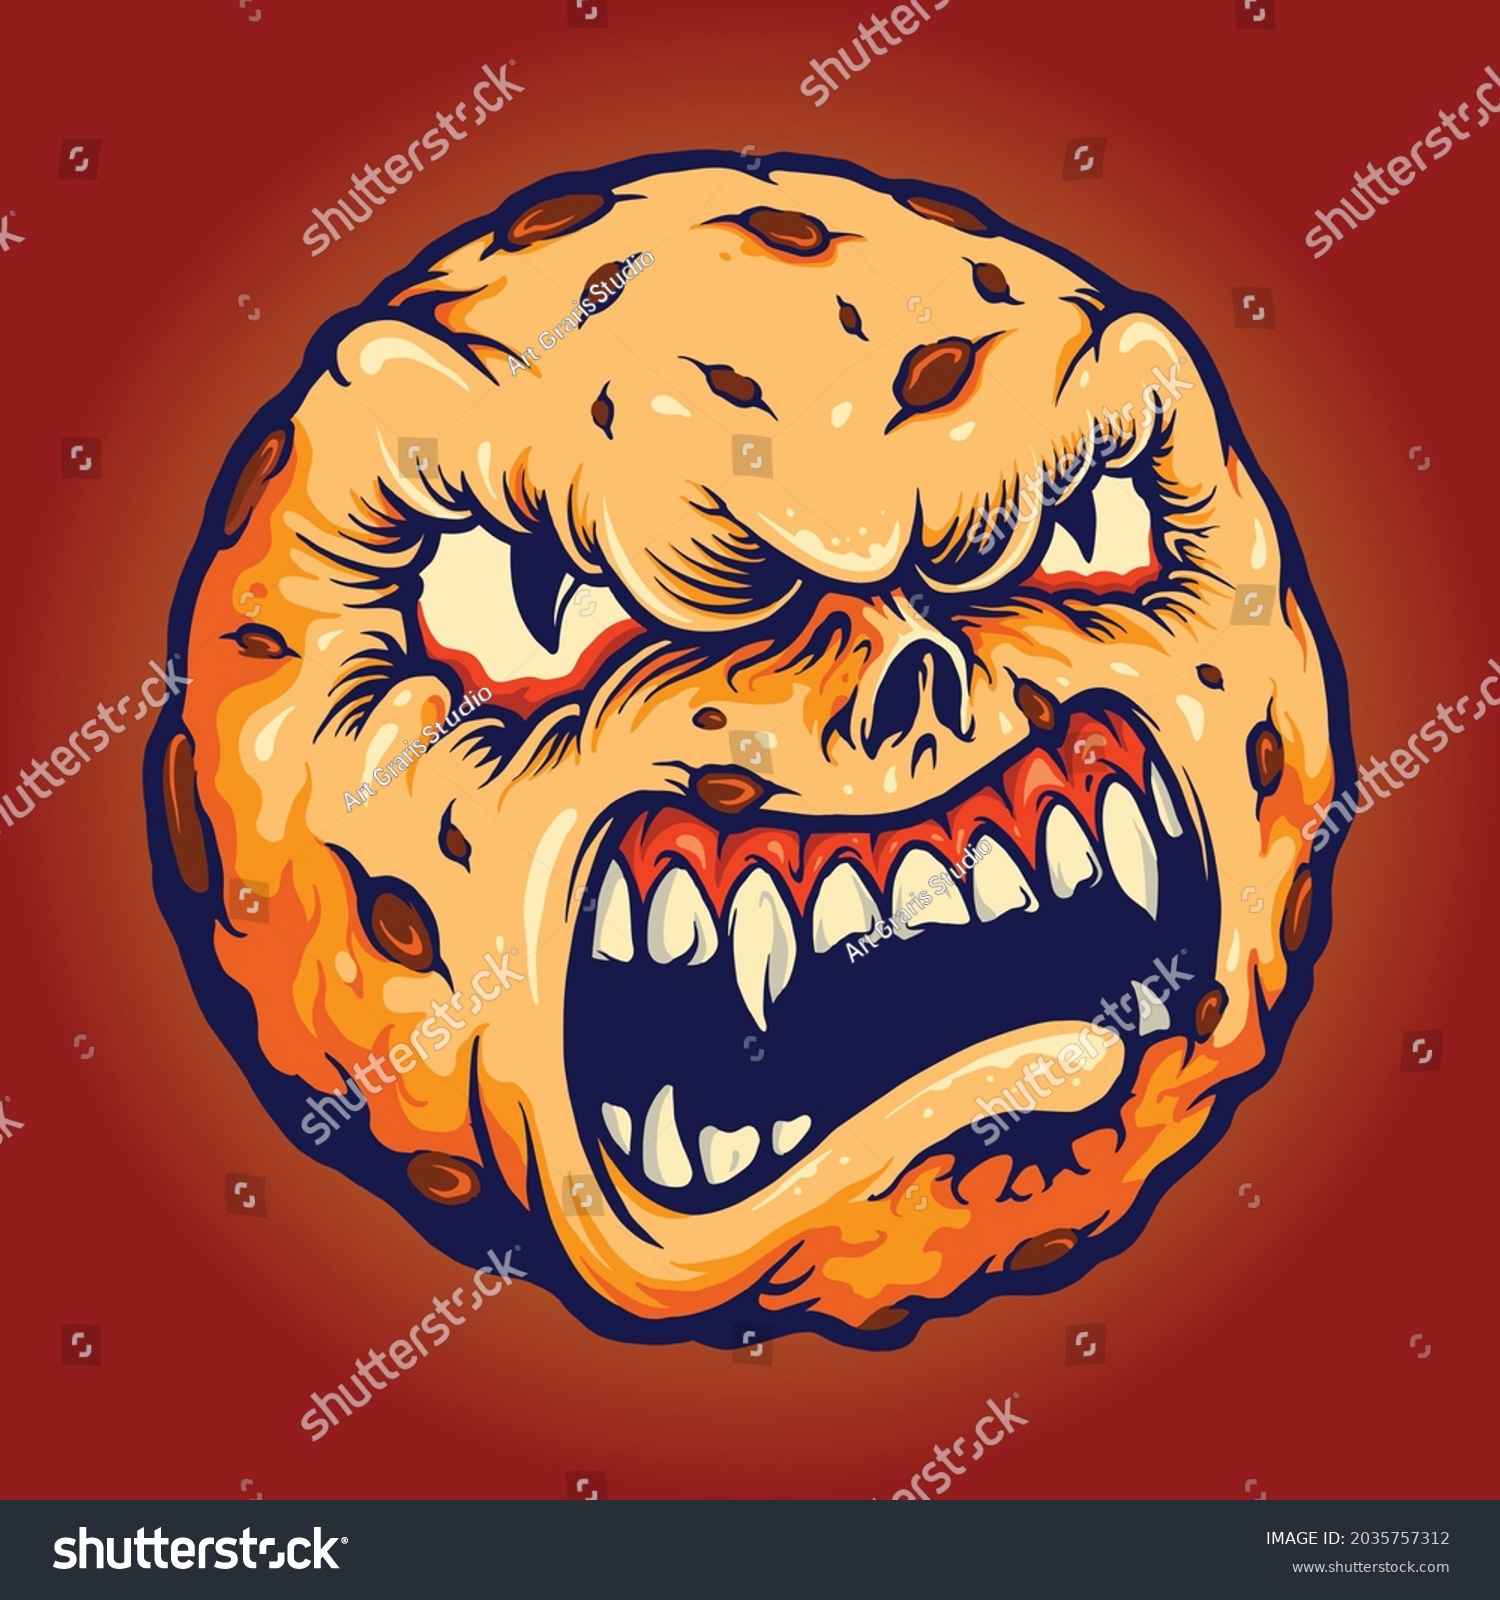 SVG of Creepy Cookies Monster Chocolate Cake Halloween Vector illustrations for Logo, mascot merchandise t-shirt, stickers and Label designs, poster, greeting cards advertising business company or brand svg